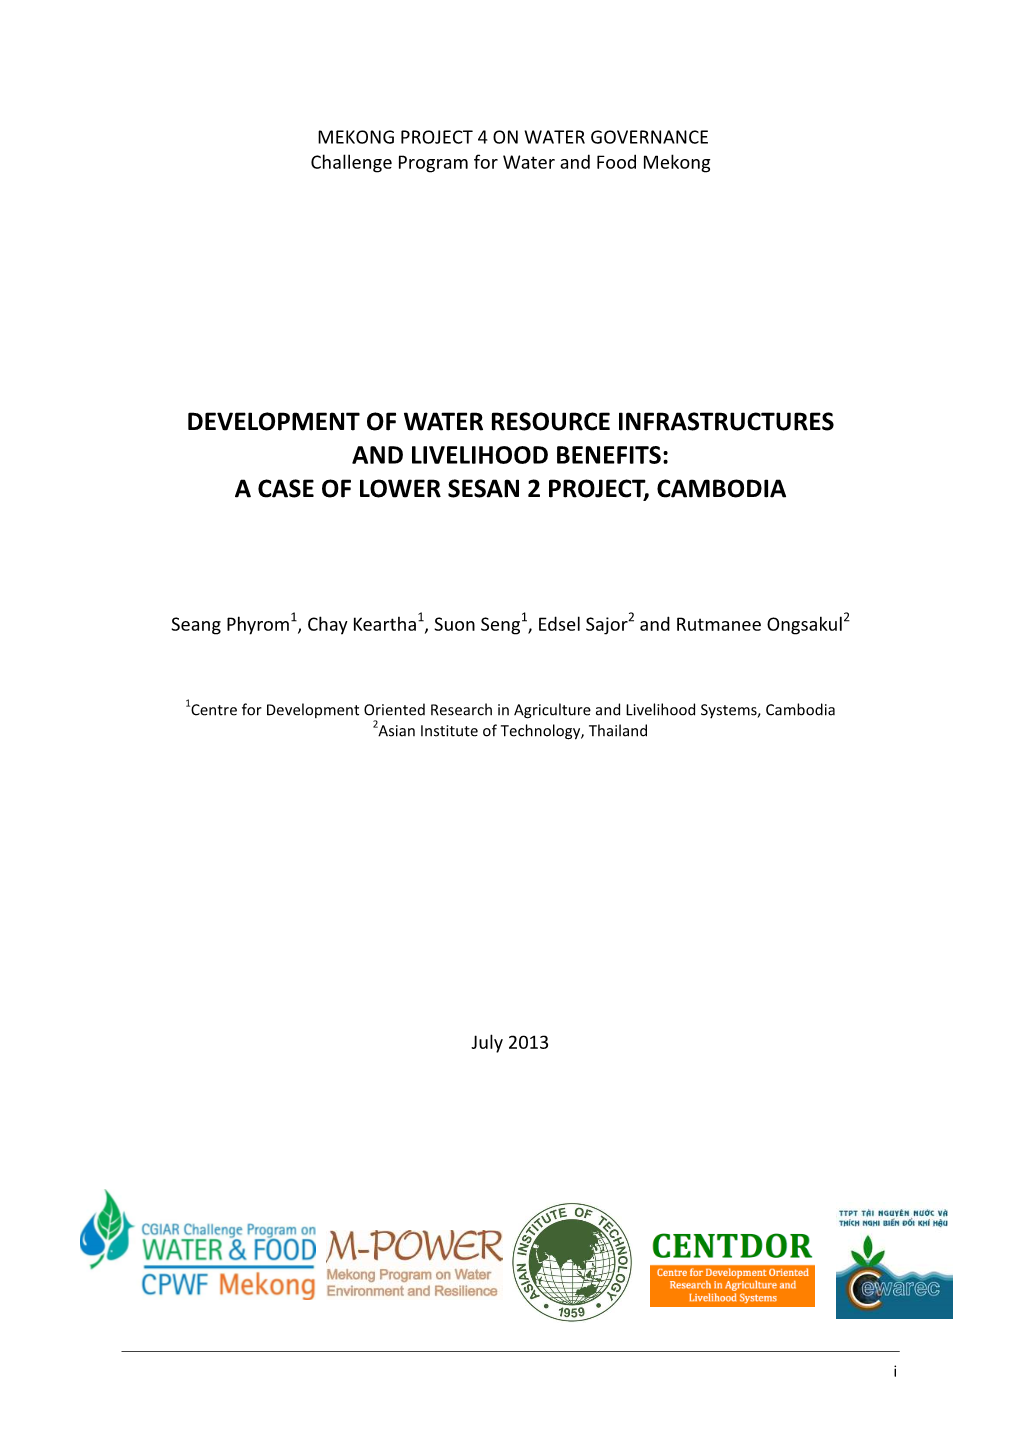 Development of Water Resource Infrastructures and Livelihood Benefits: a Case of Lower Sesan 2 Project, Cambodia